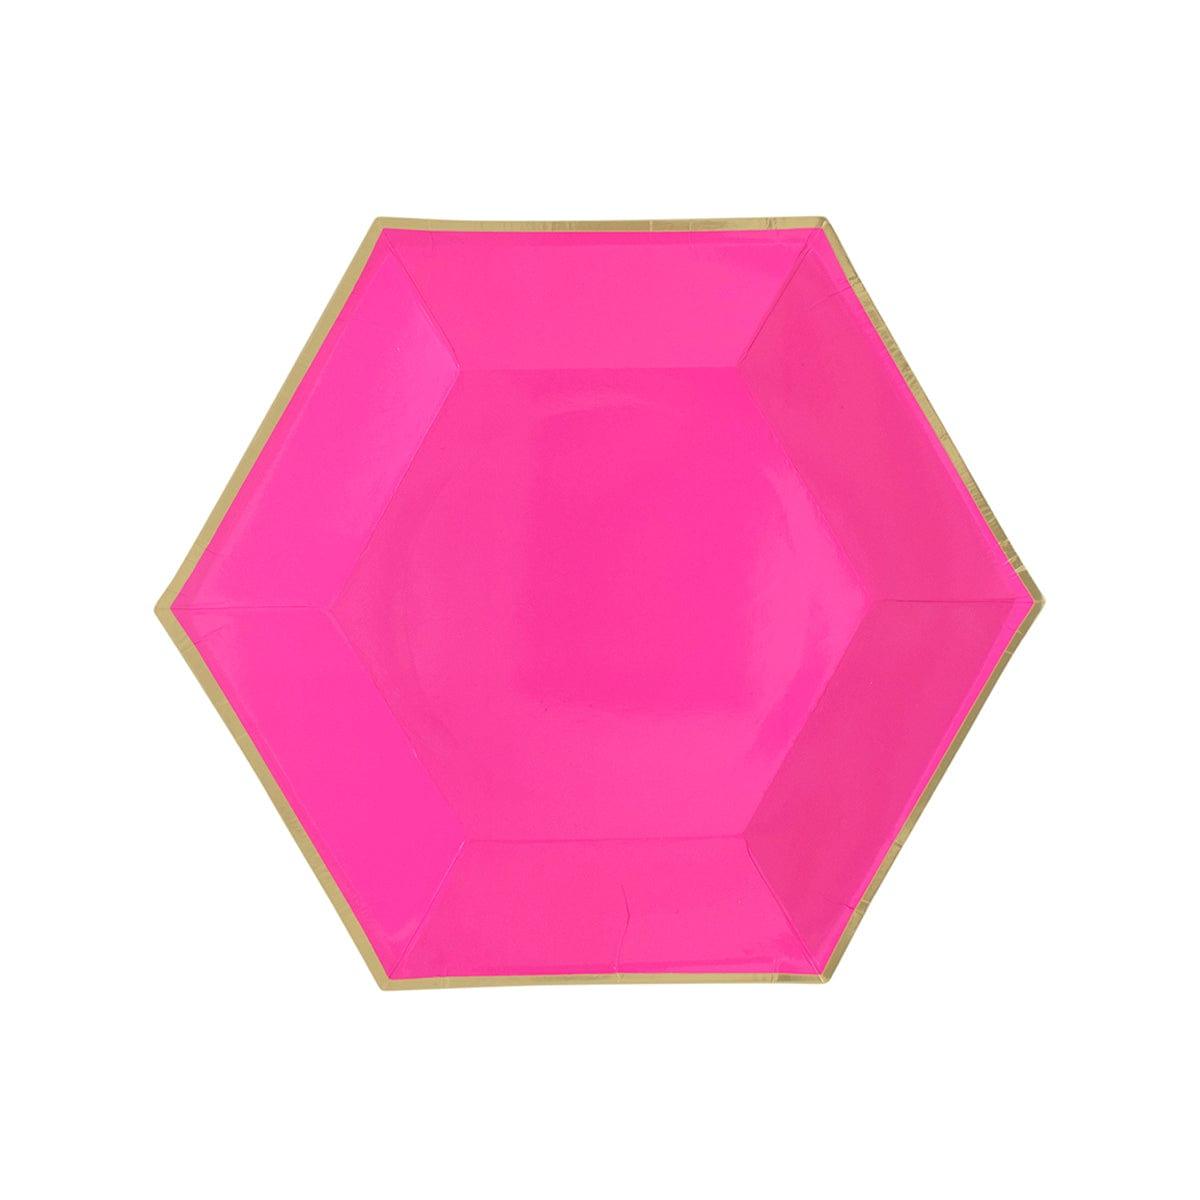 YIWU SANDY PAPER PRODUCTS CO., LTD Everyday Entertaining Hexagon Plates Hot Pink, 7 Inches, 8 Count